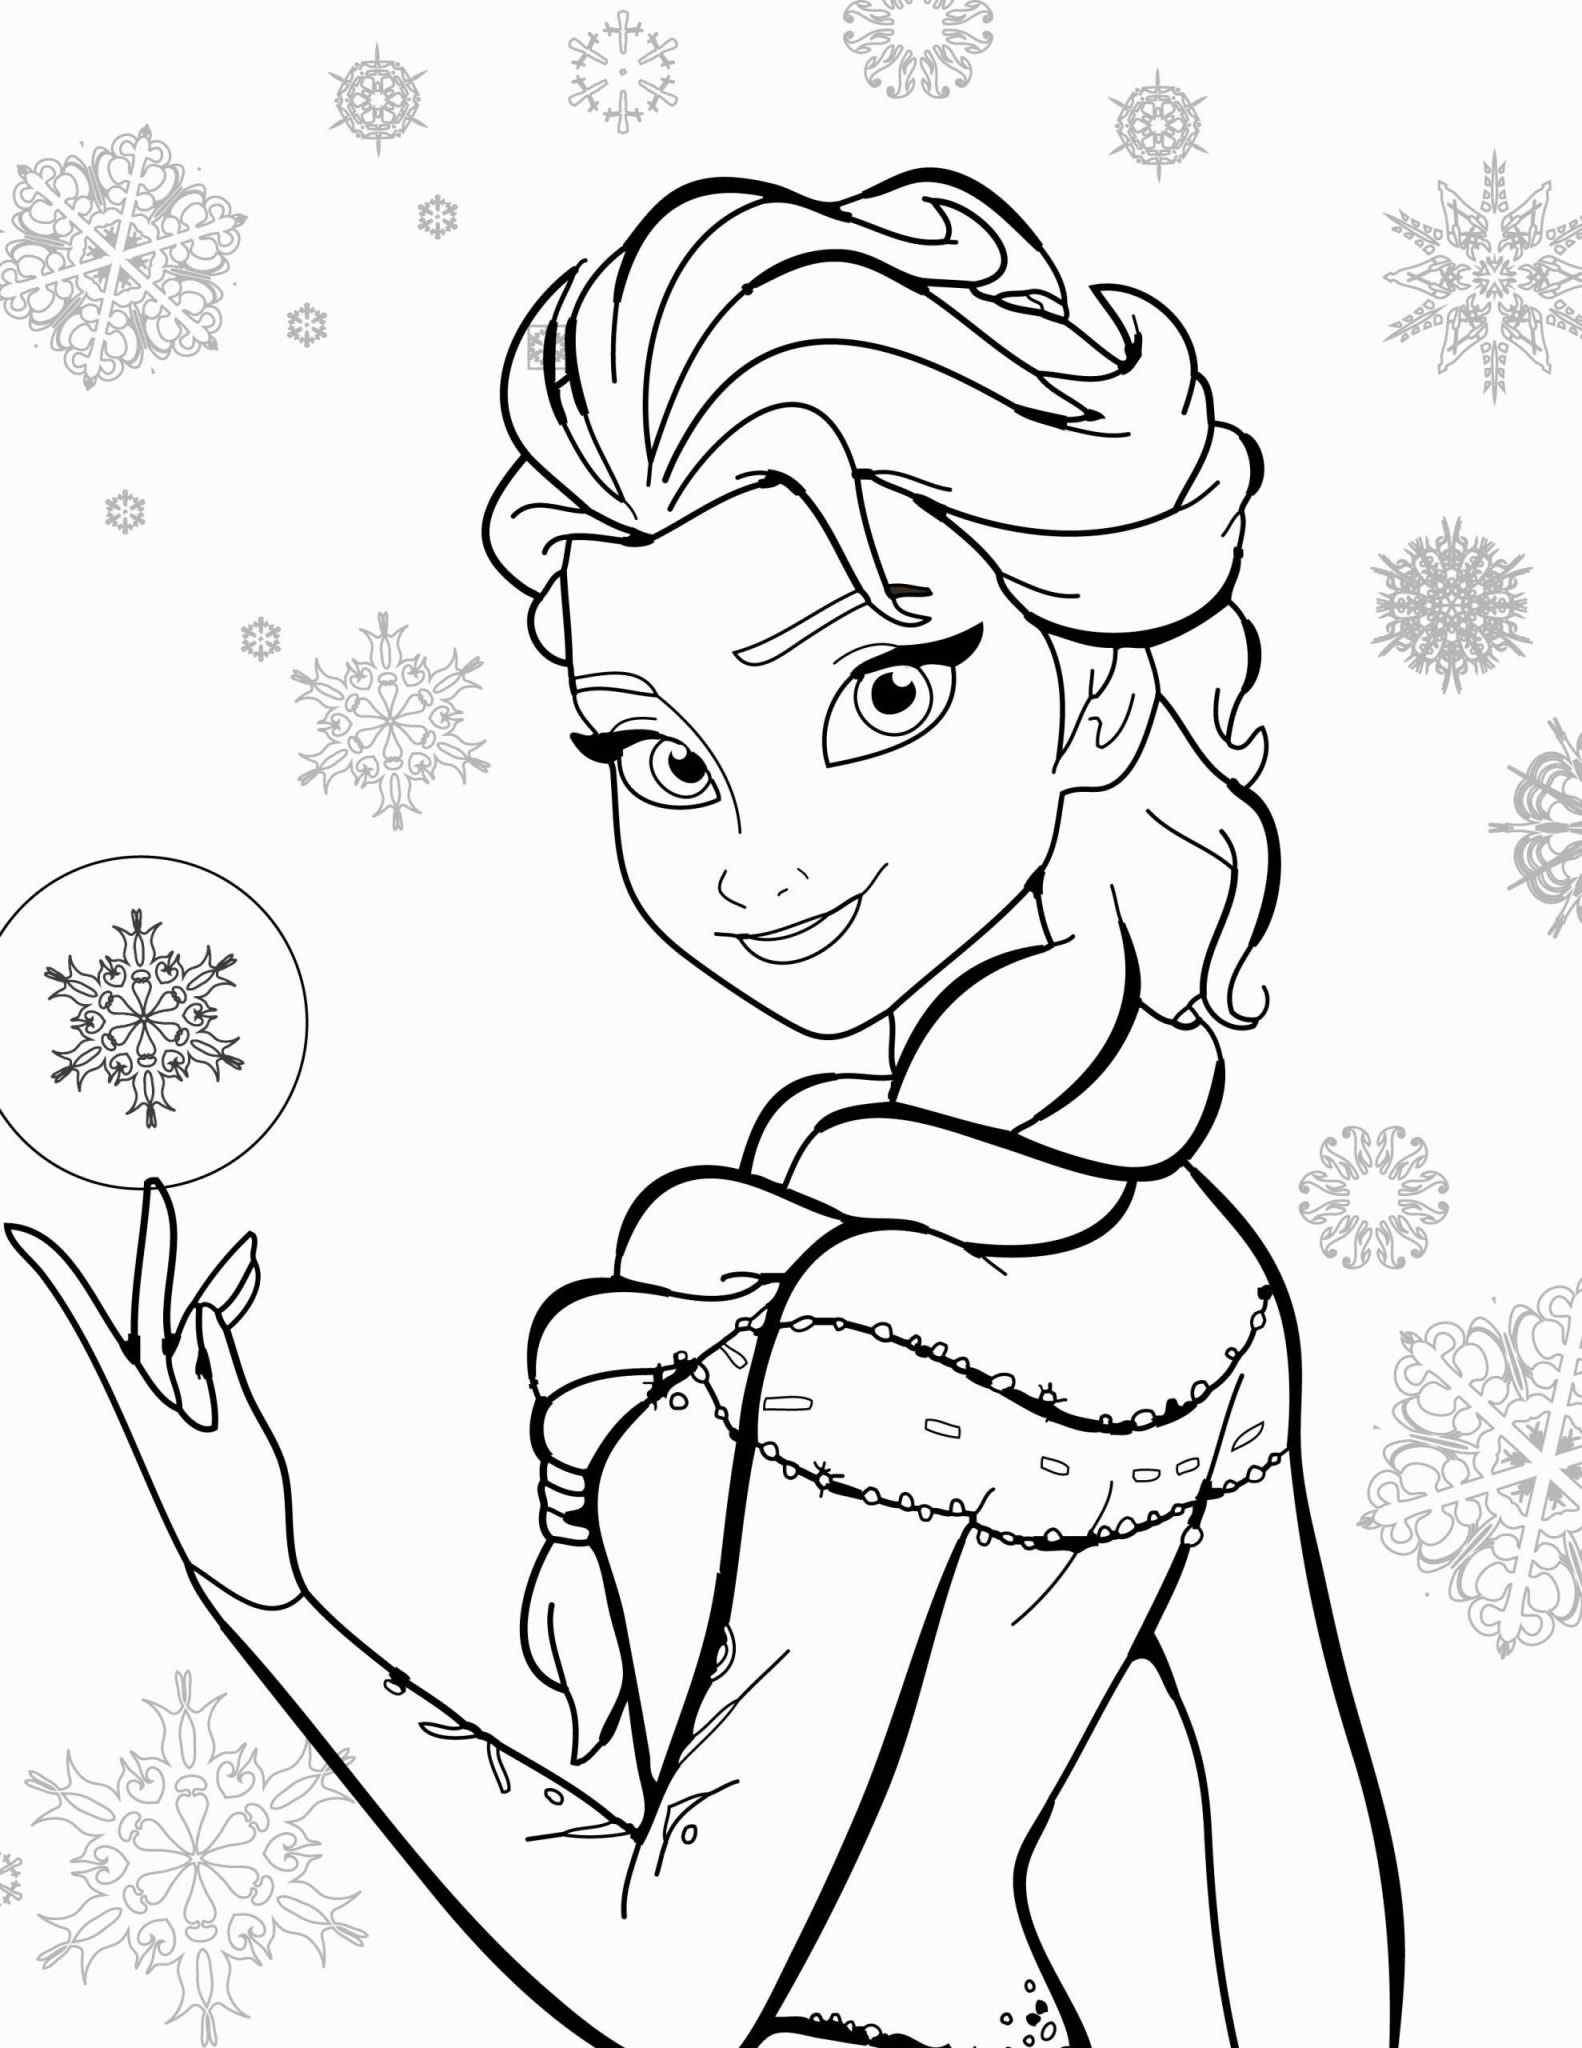 Beauty Elsa in Christmas Coloring Page